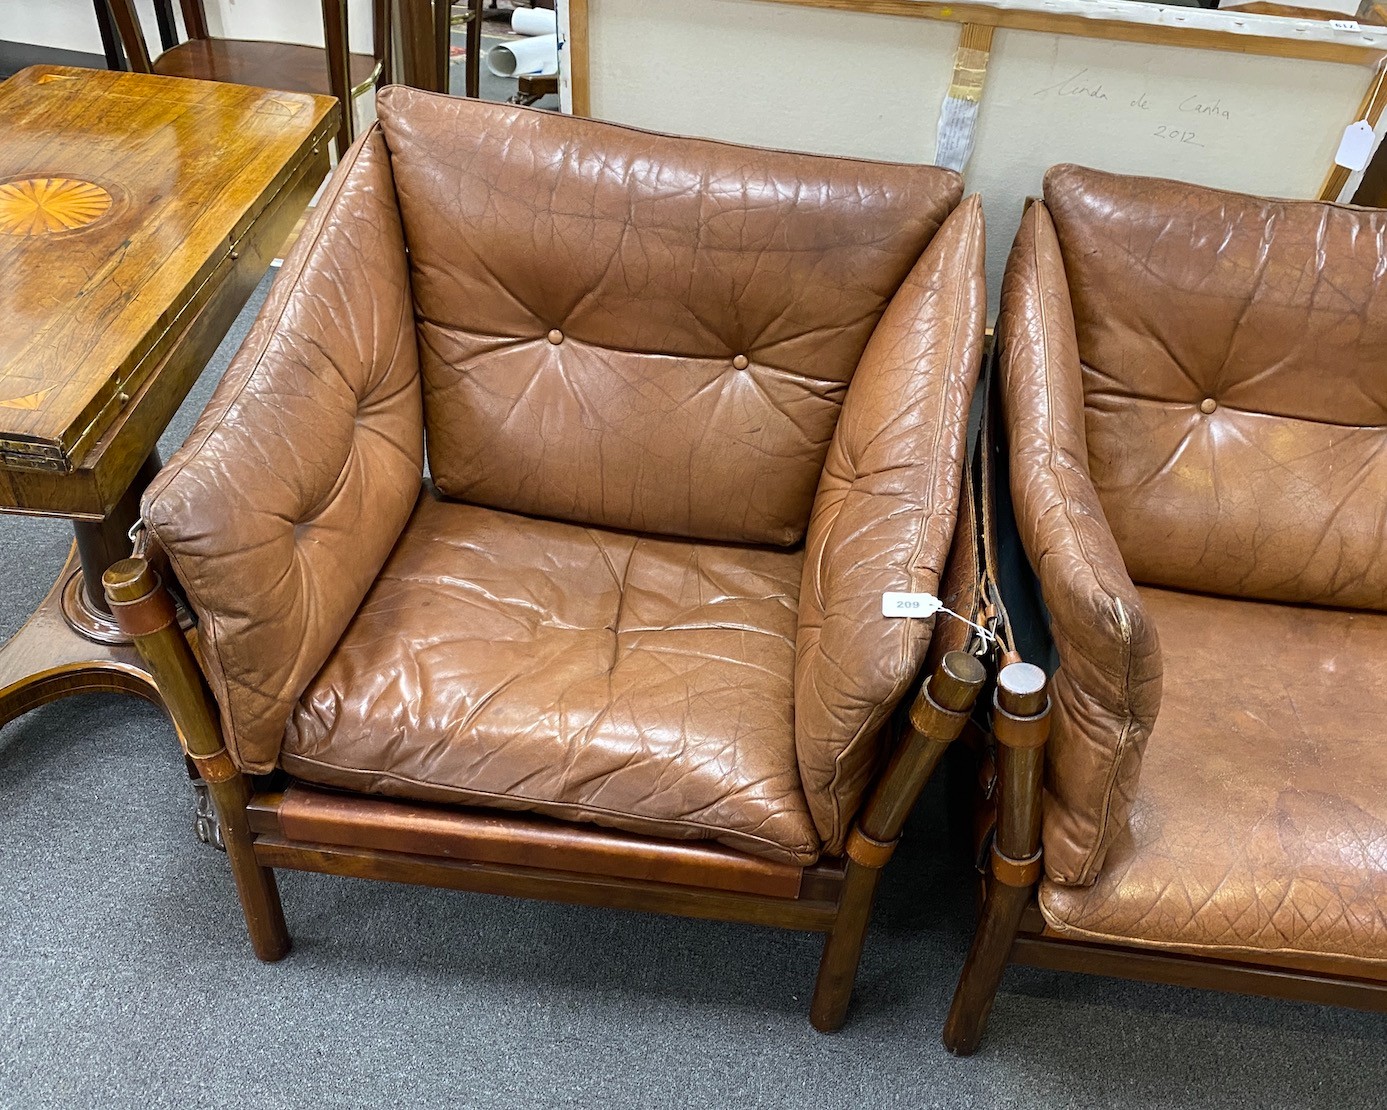 An Arne Norell Ilona settee and two chairs, manufactured by Aneby Mobler in 1960's, settee length 150cm, depth 73cm, height 77cm